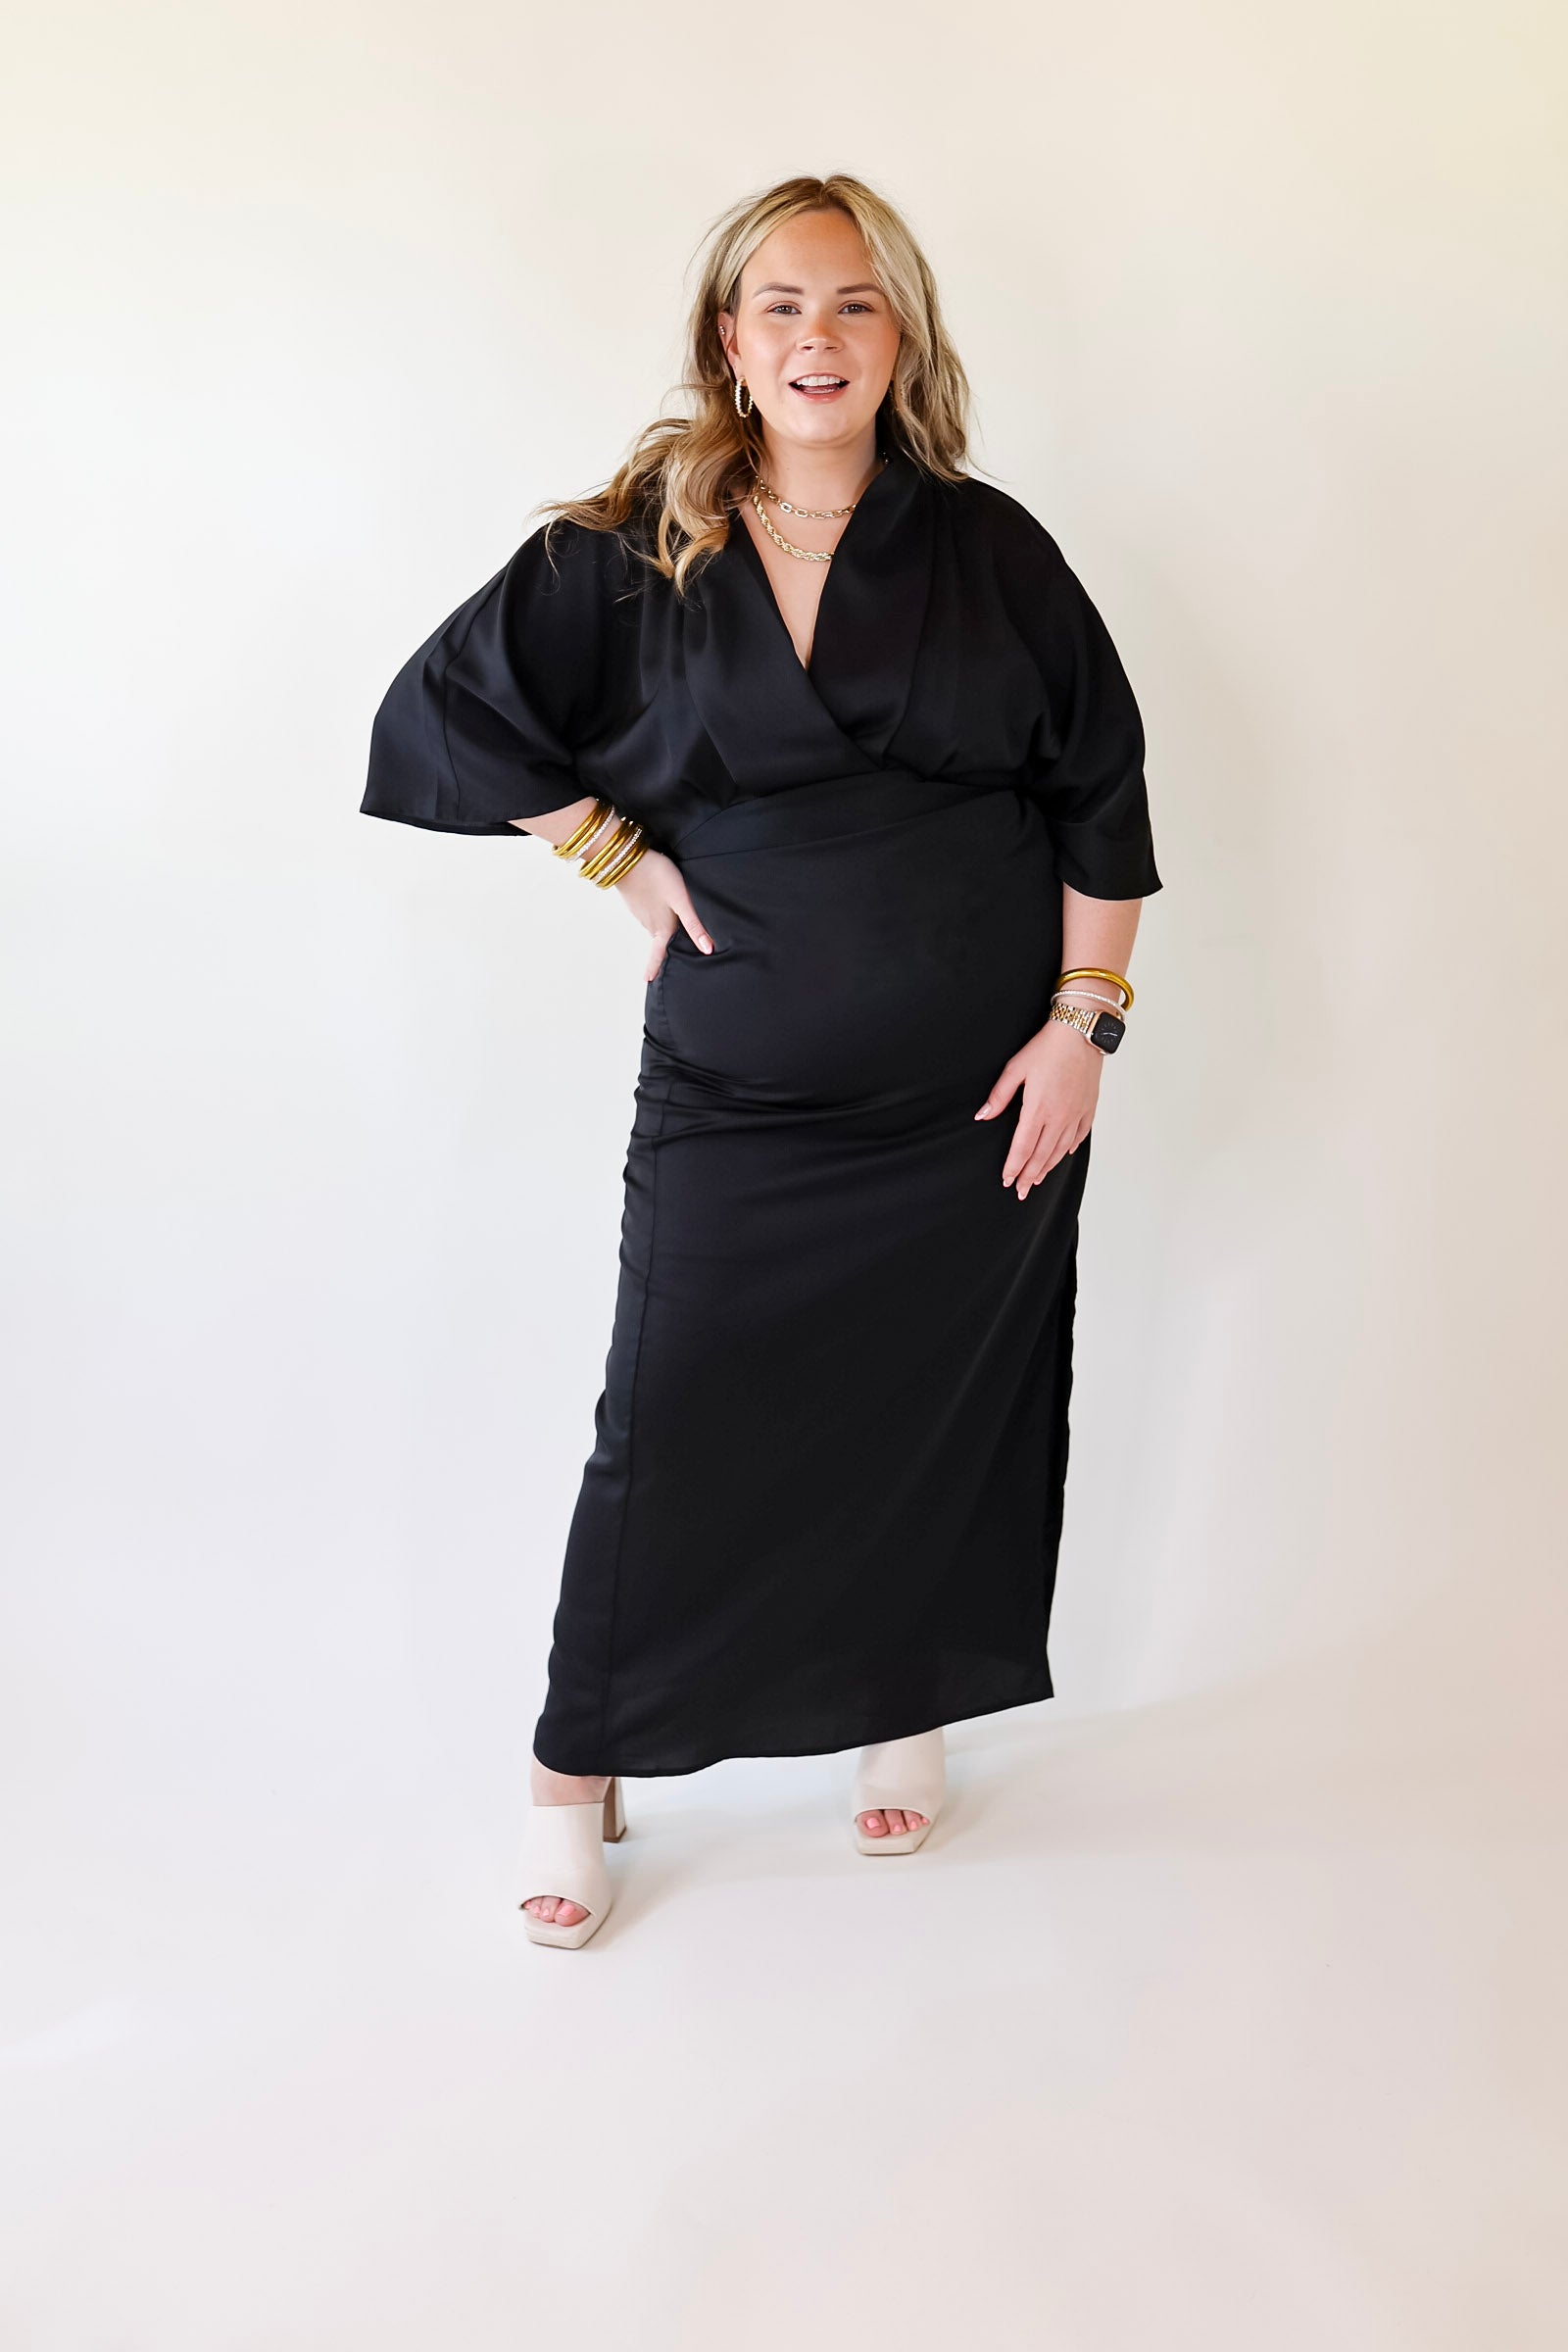 Like Royalty Maxi Dress With a Cross Front and Slit in Black - Giddy Up Glamour Boutique